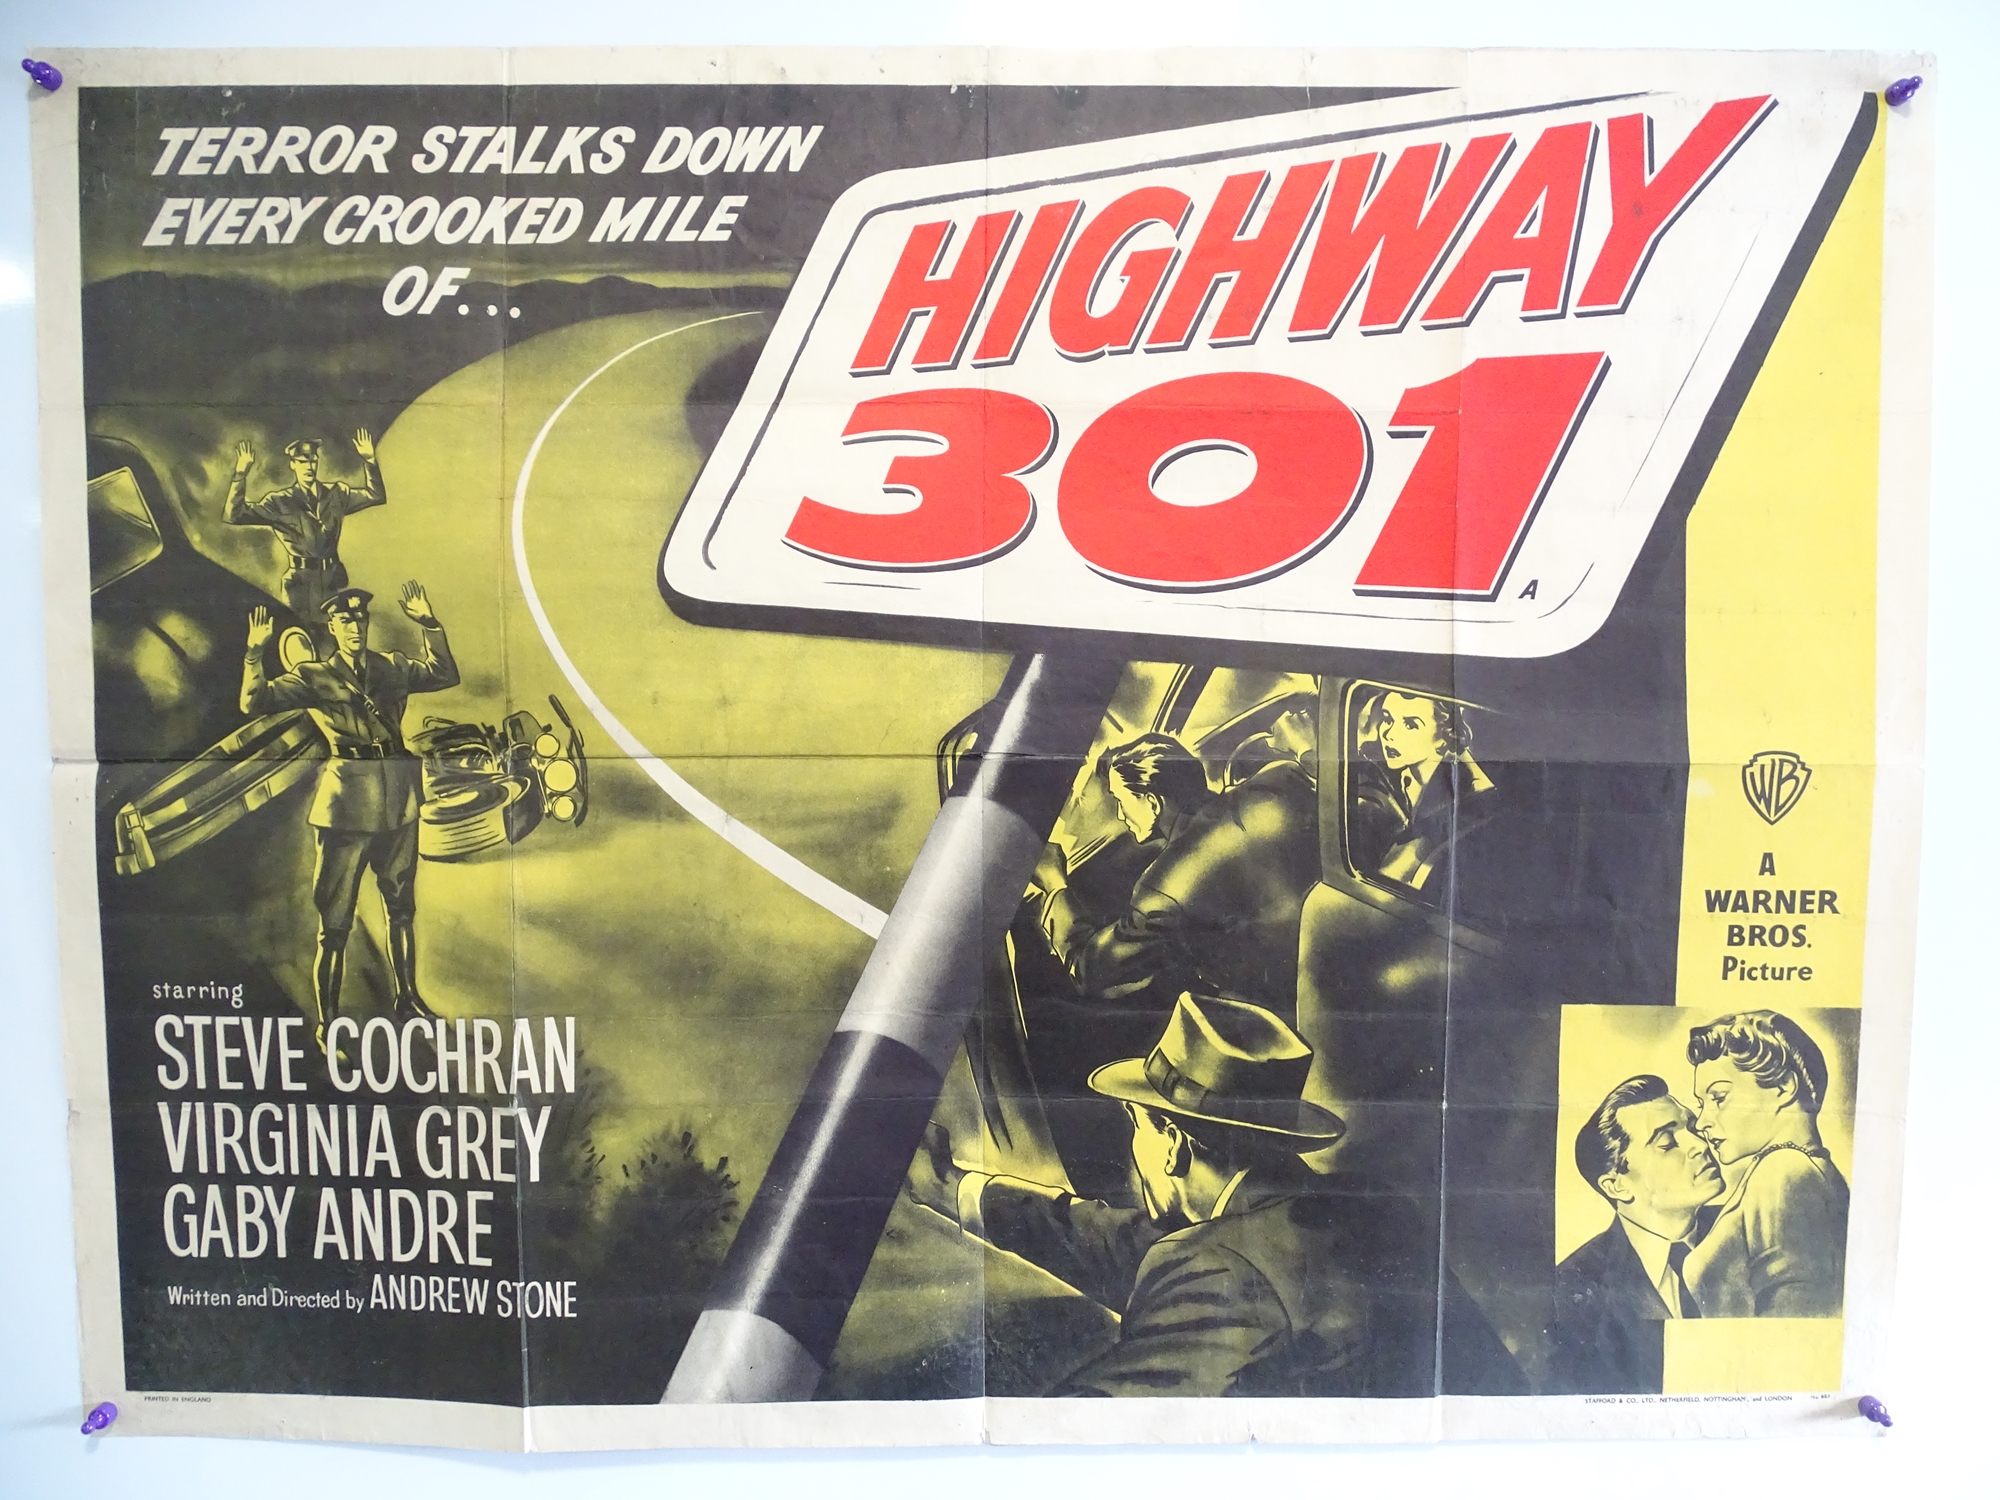 A group of 3 UK Quad film posters comprising: THE BARON OF ARIZONA, HIGHWAY 301 and FBI STORY - (30" - Image 2 of 3